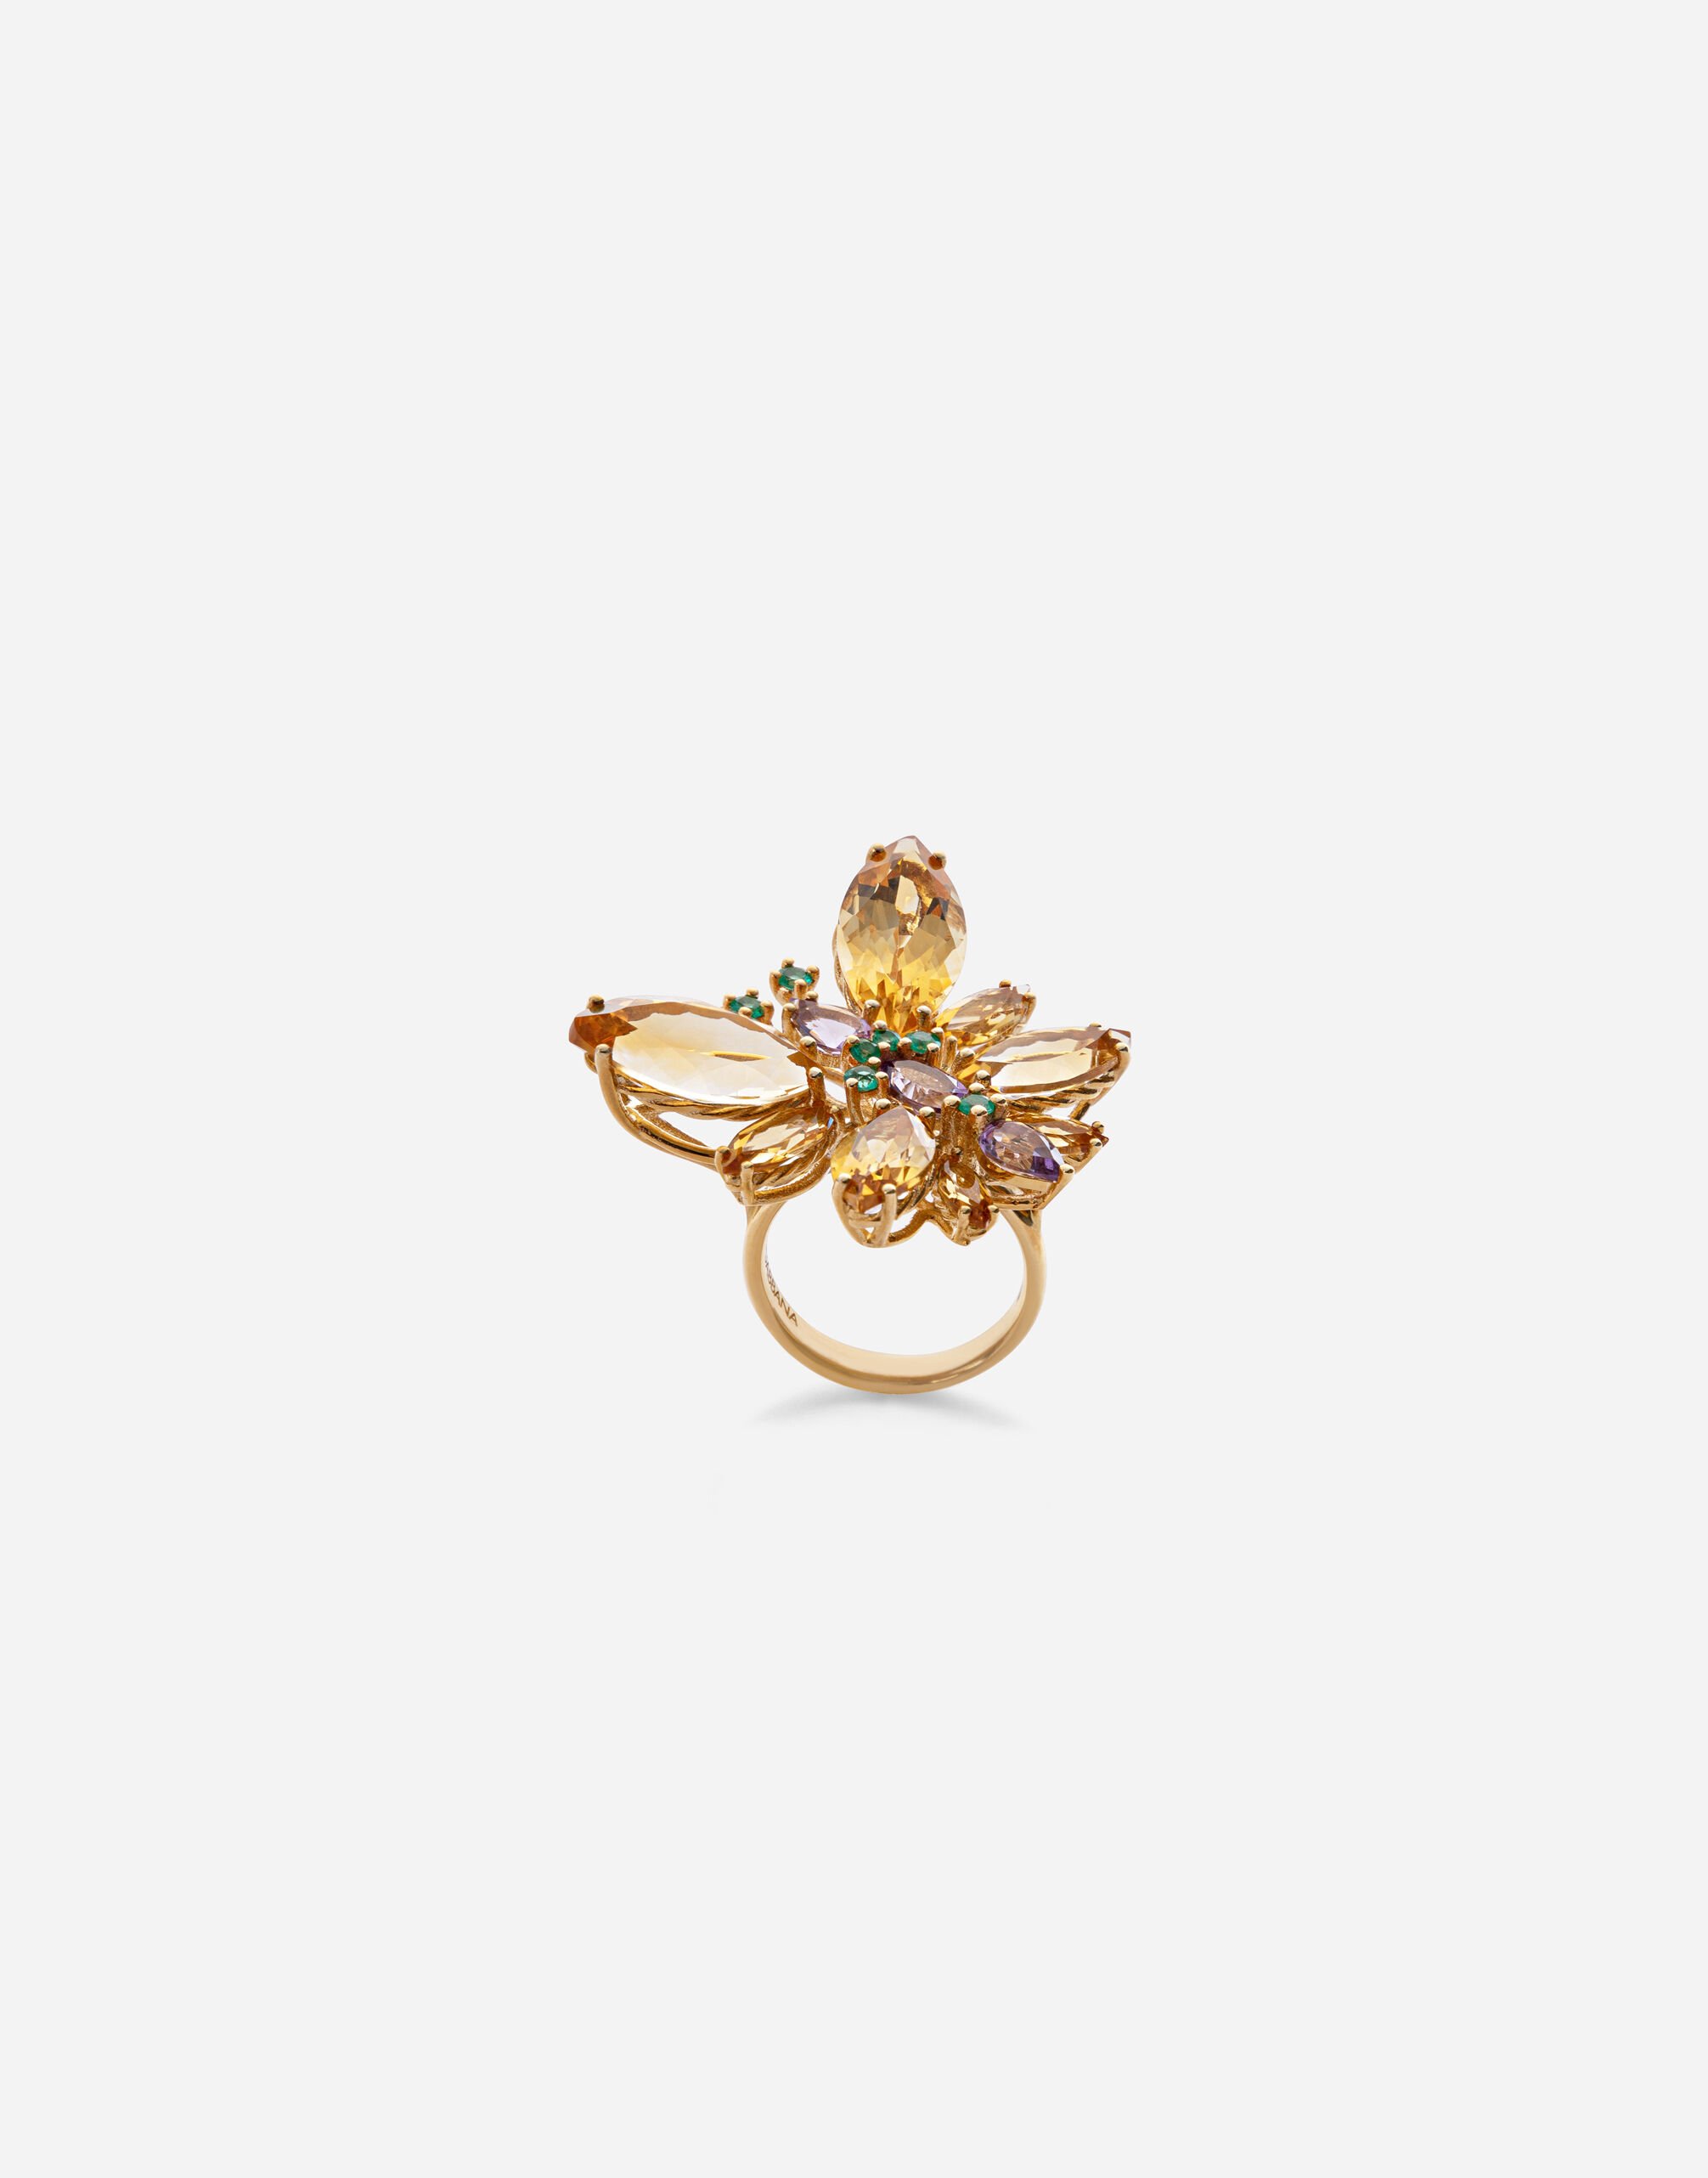 Dolce & Gabbana Spring ring in yellow 18kt gold with citrine butterfly Gold WRMR1GWMIXU